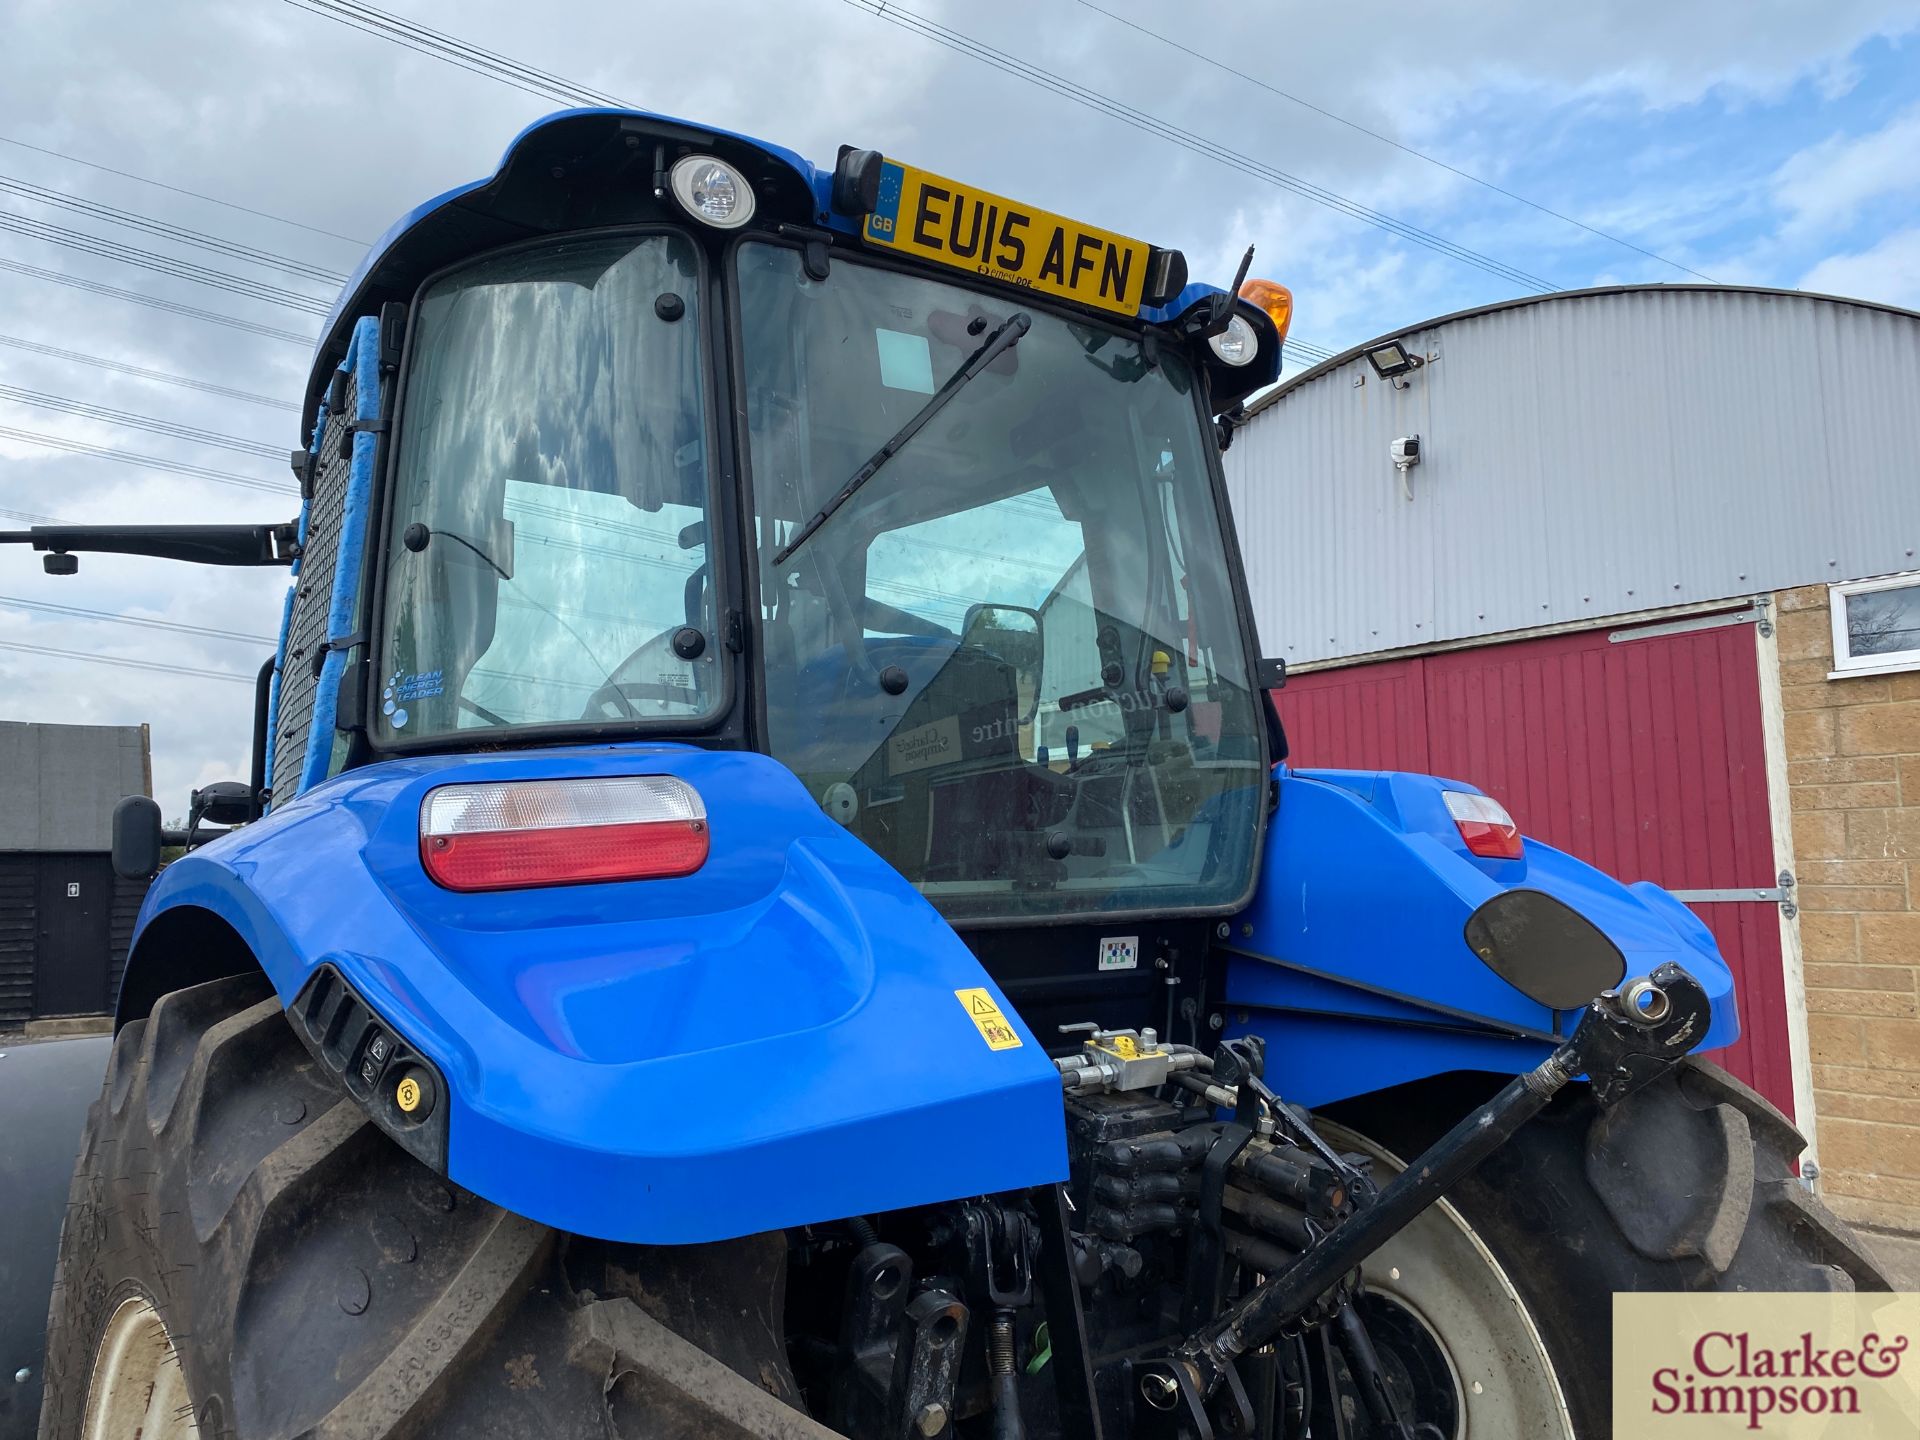 New Holland T5.105 4WD tractor. Registration EU15 AFN. Date of first registration 03/2015. Serial - Image 23 of 48